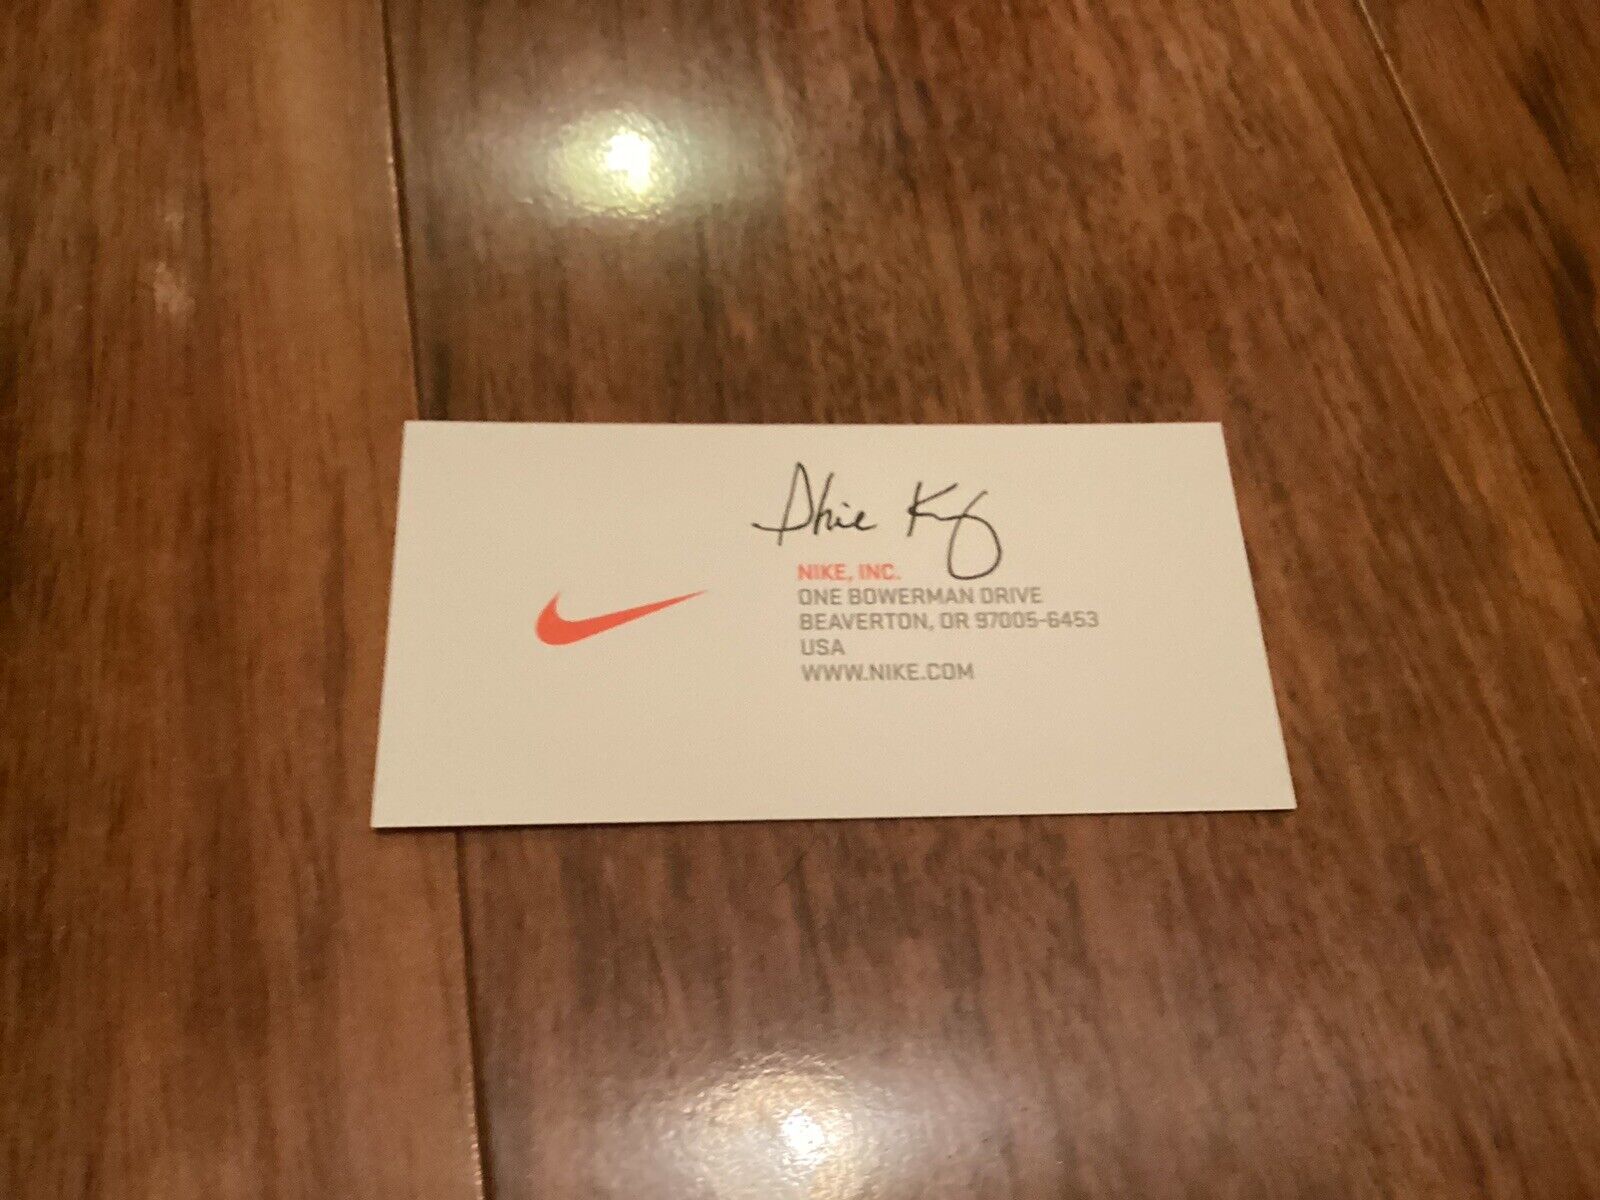 PHIL KNIGHT JORDAN SIGNED AUTOGRAPHED NIKE  BUSINESS CARD